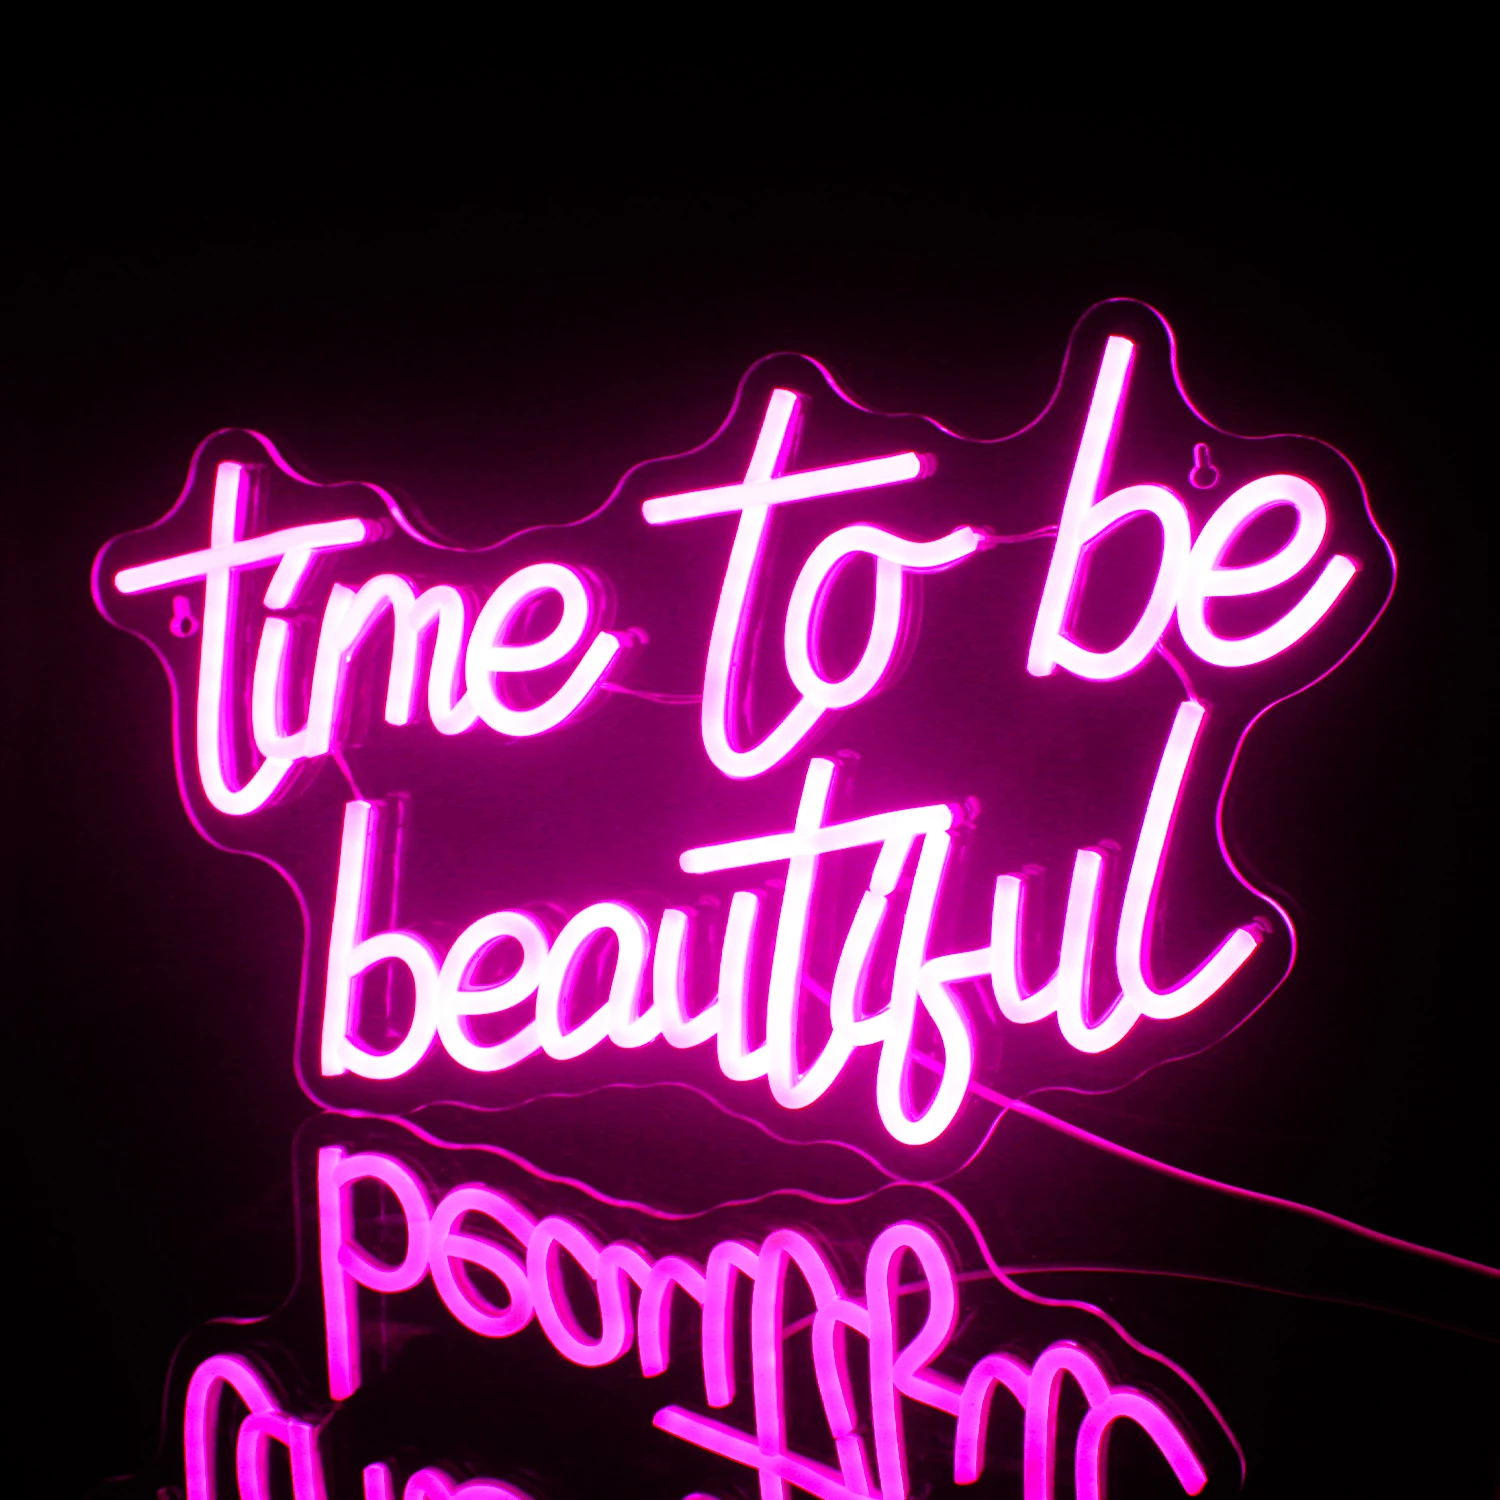 

Time To Be Beautiful LED Neon Sign For Room Decor Romantic Wedding Night Light Hanging Wall Decoration Transparent Board Lamp